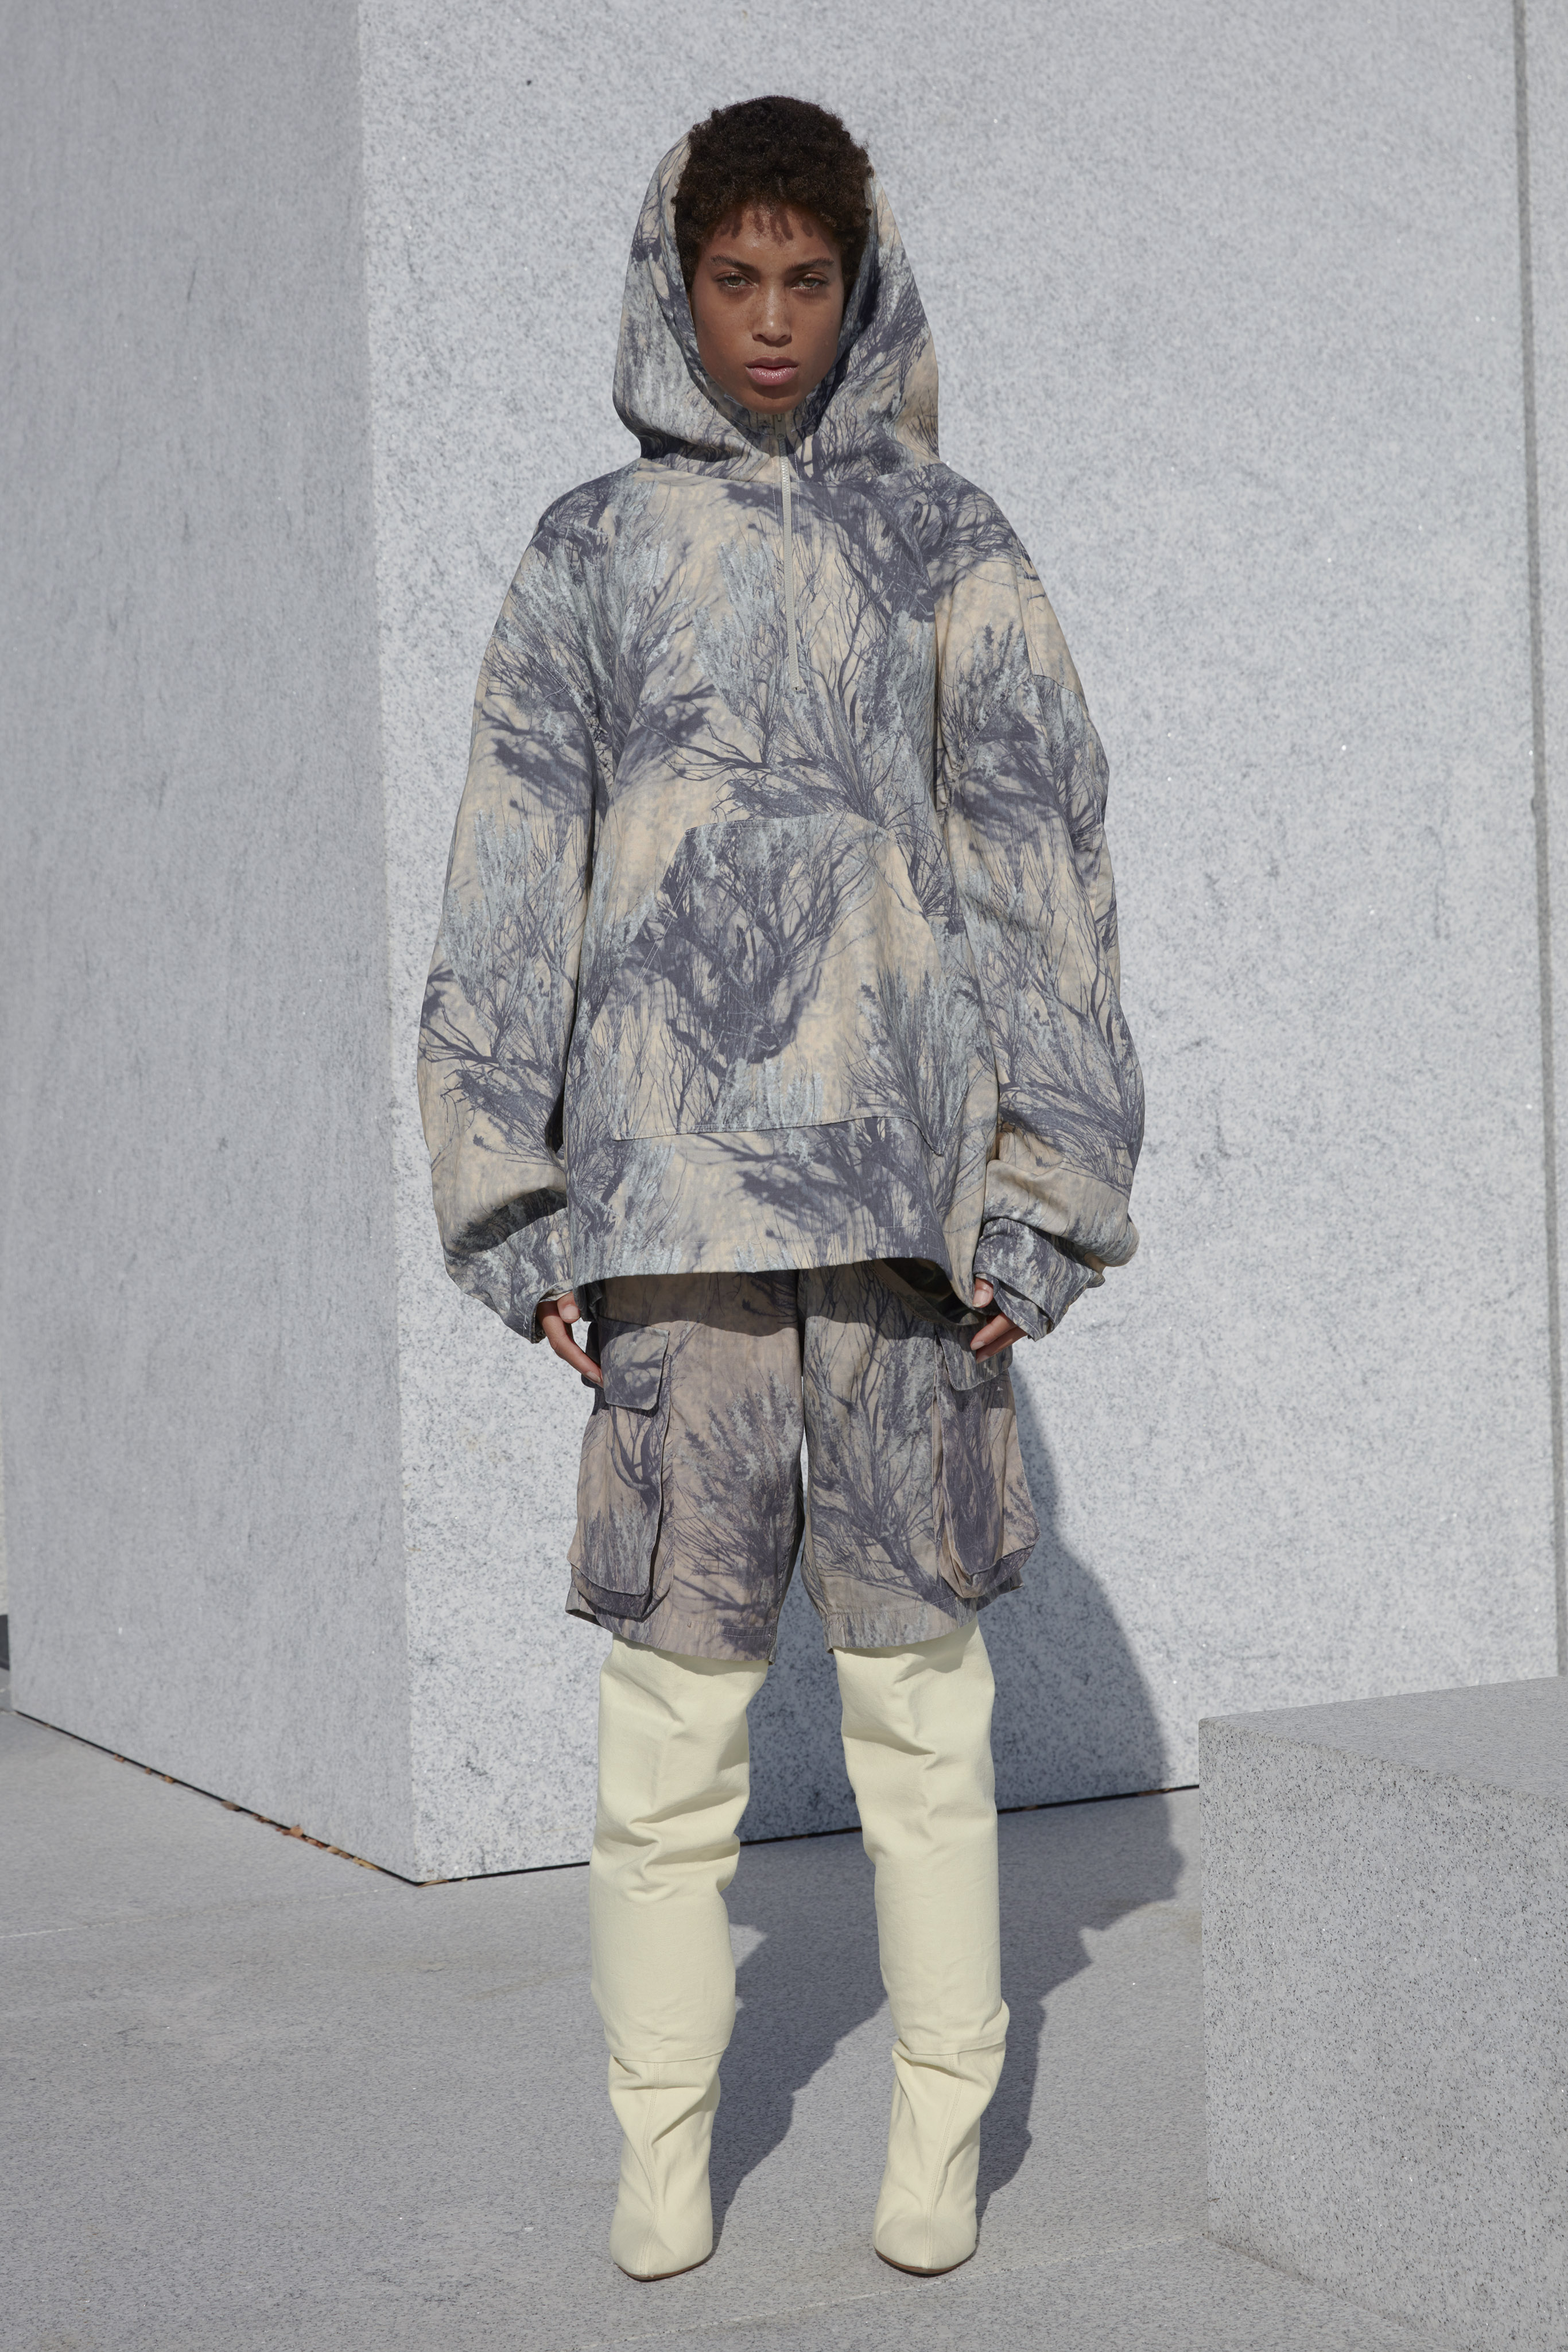 A Closer Look at Kanye Wests Yeezy Season 4 Collection 